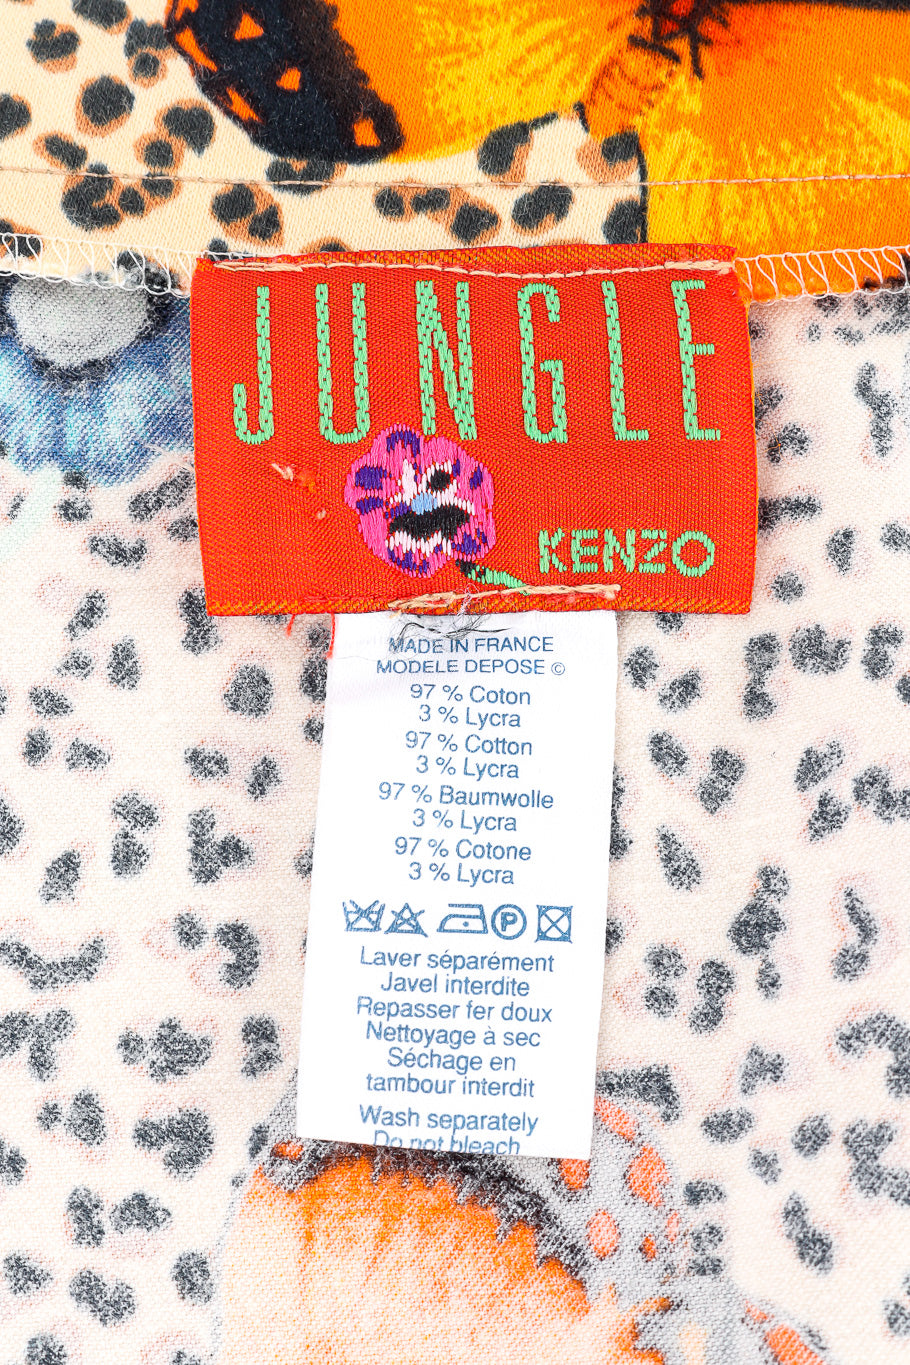 Butterfly jacket and skirt set by Kenzo flat lay skirt tag @recessla